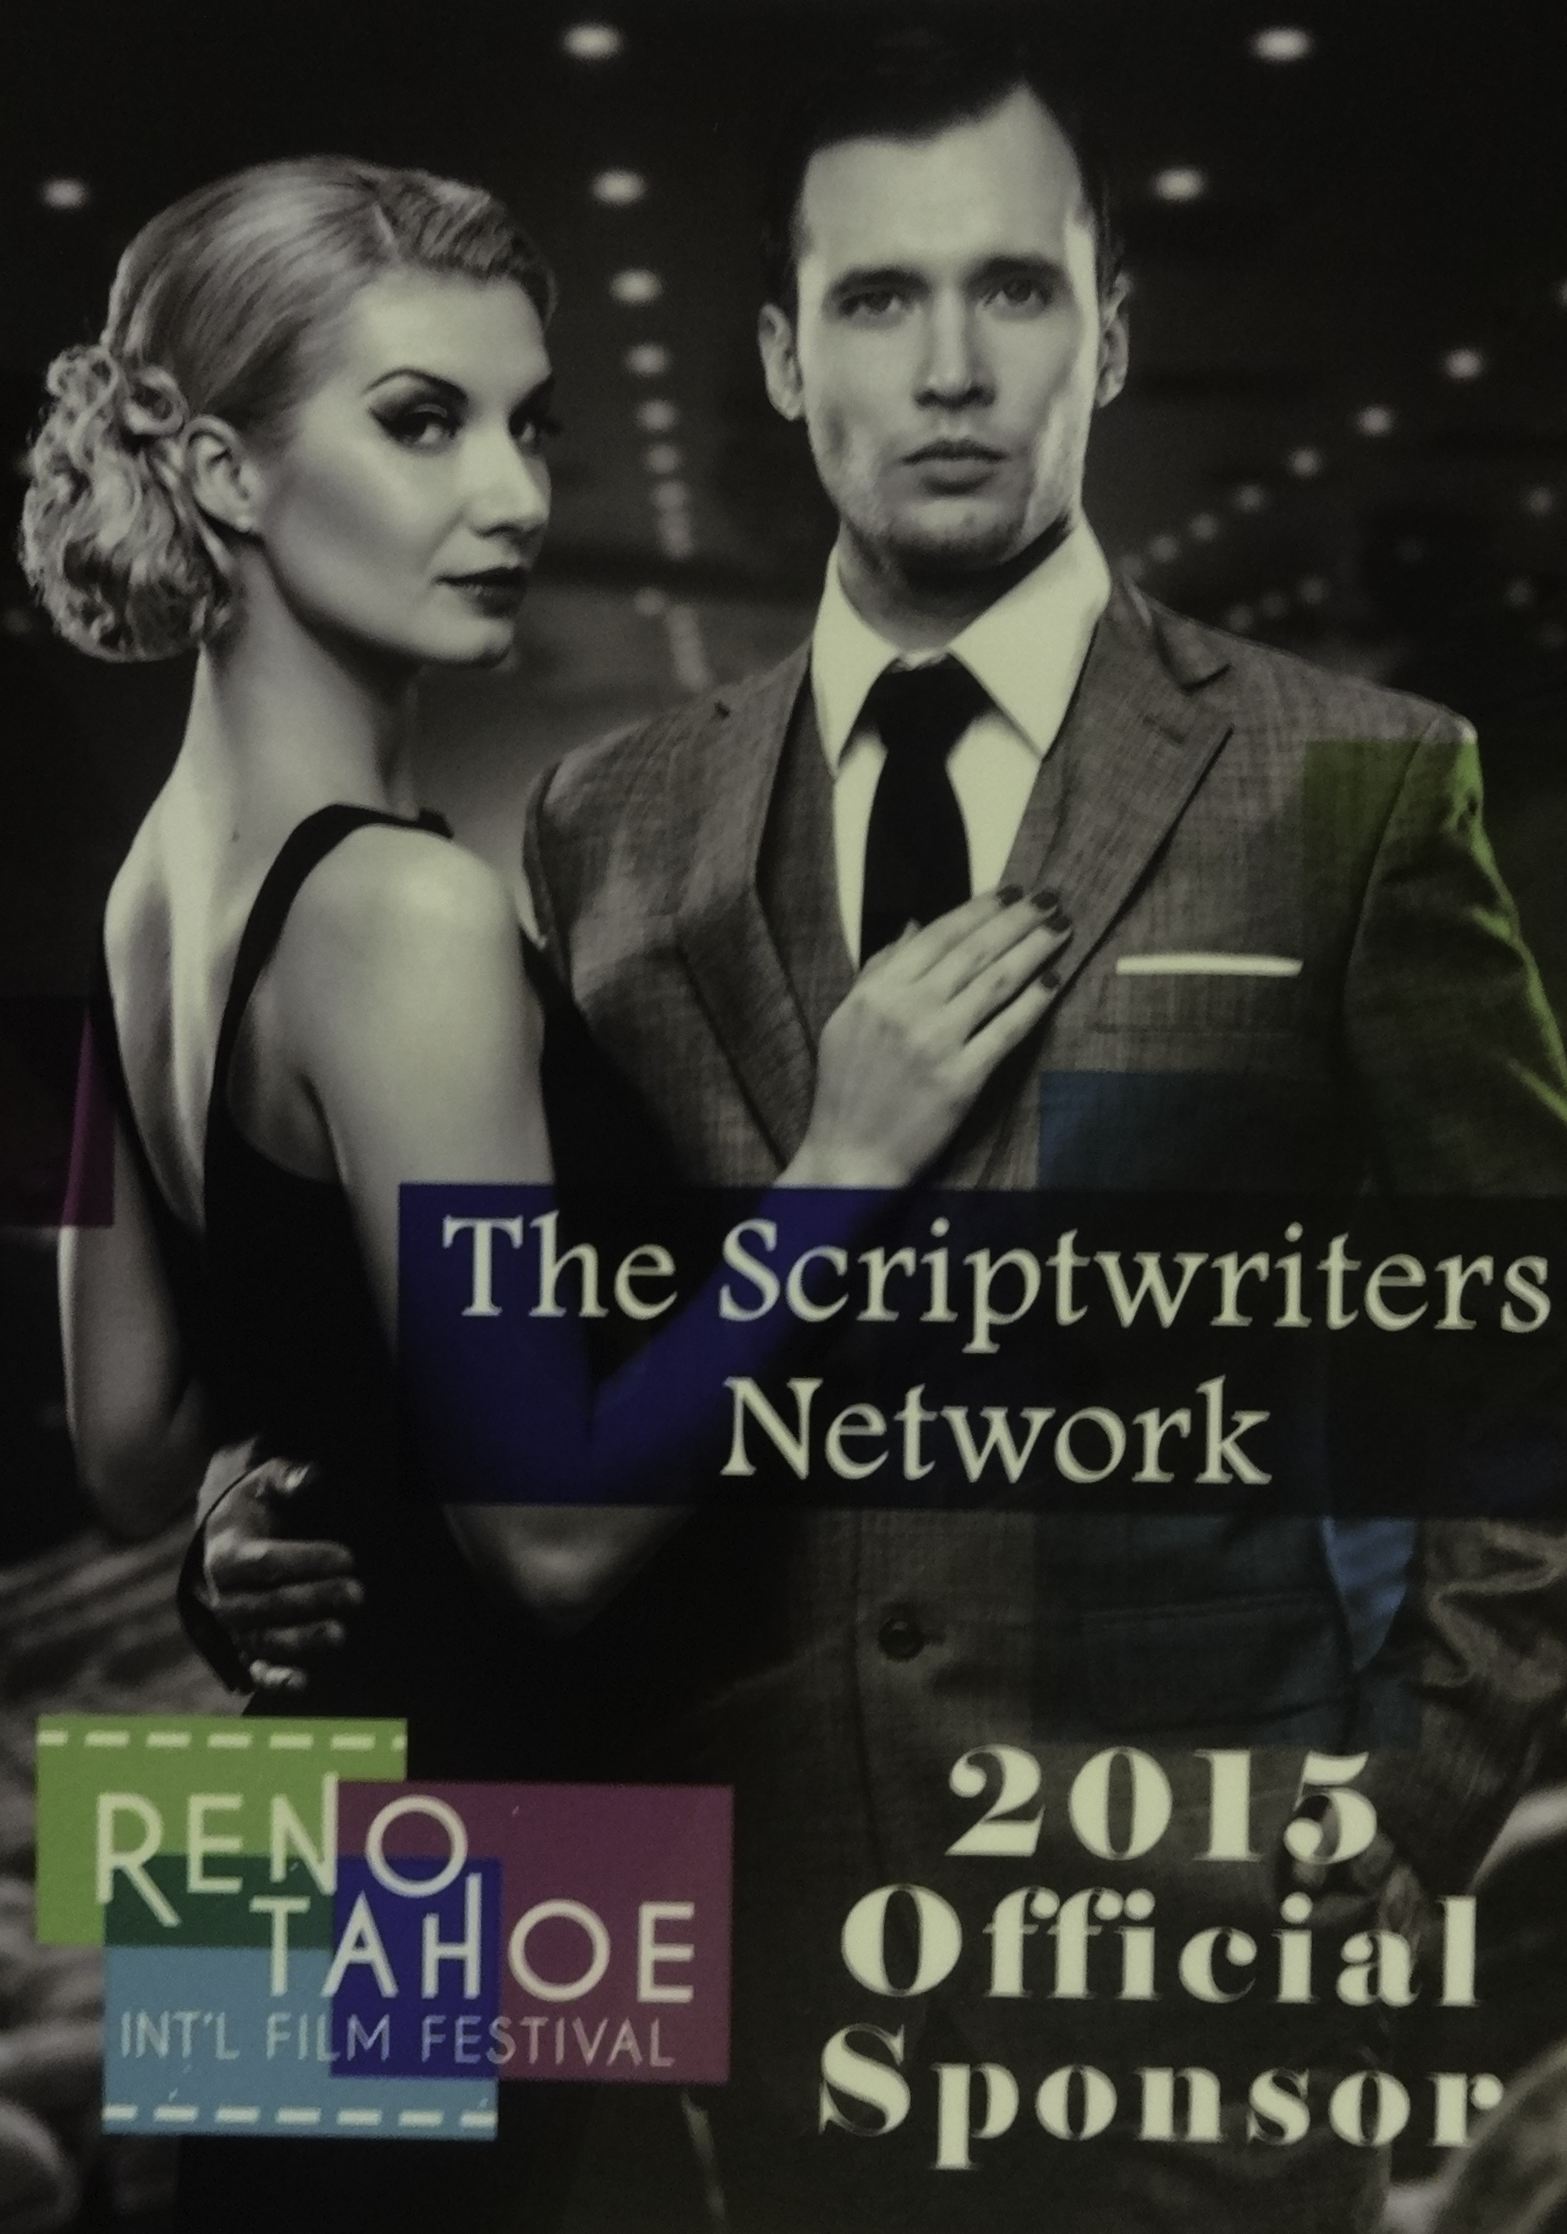 The Scriptwriters Network 2015 Official Sponsor